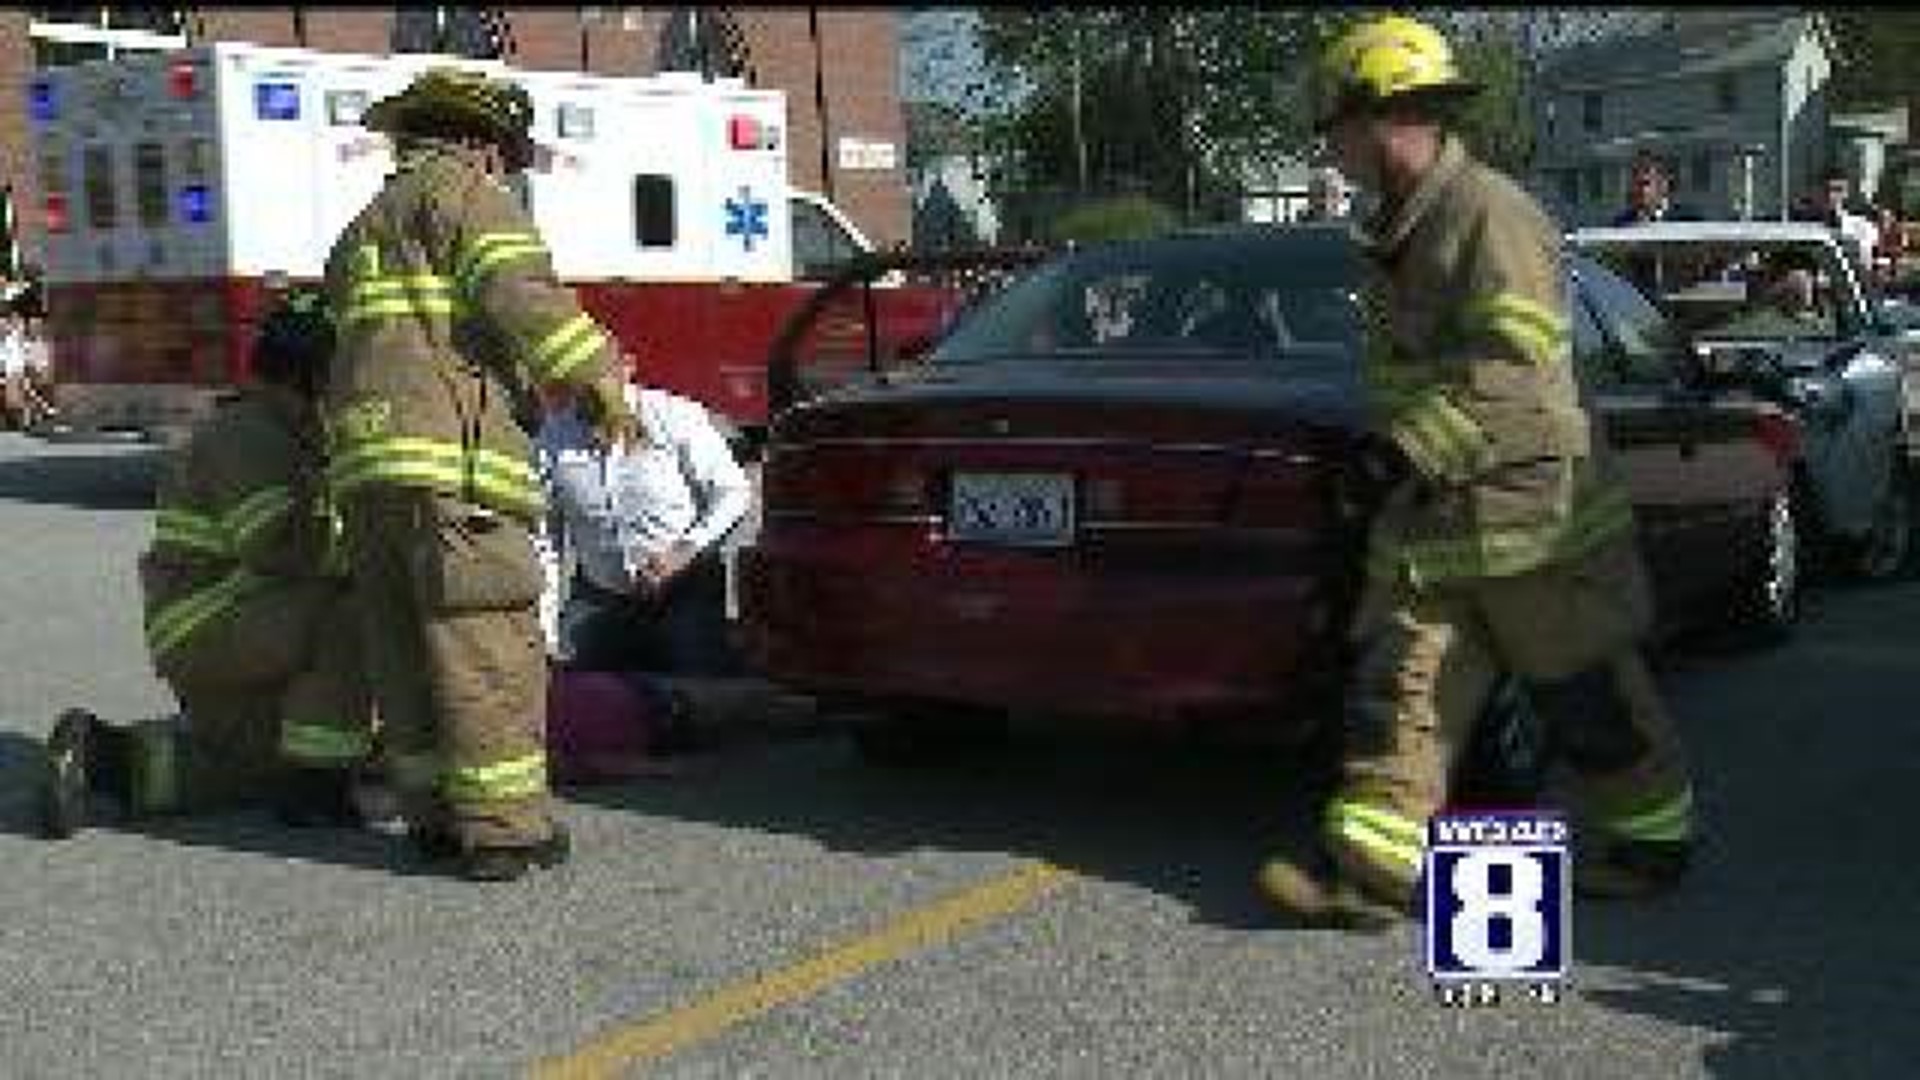 Simulated car crash reminds teens to be safe on prom night